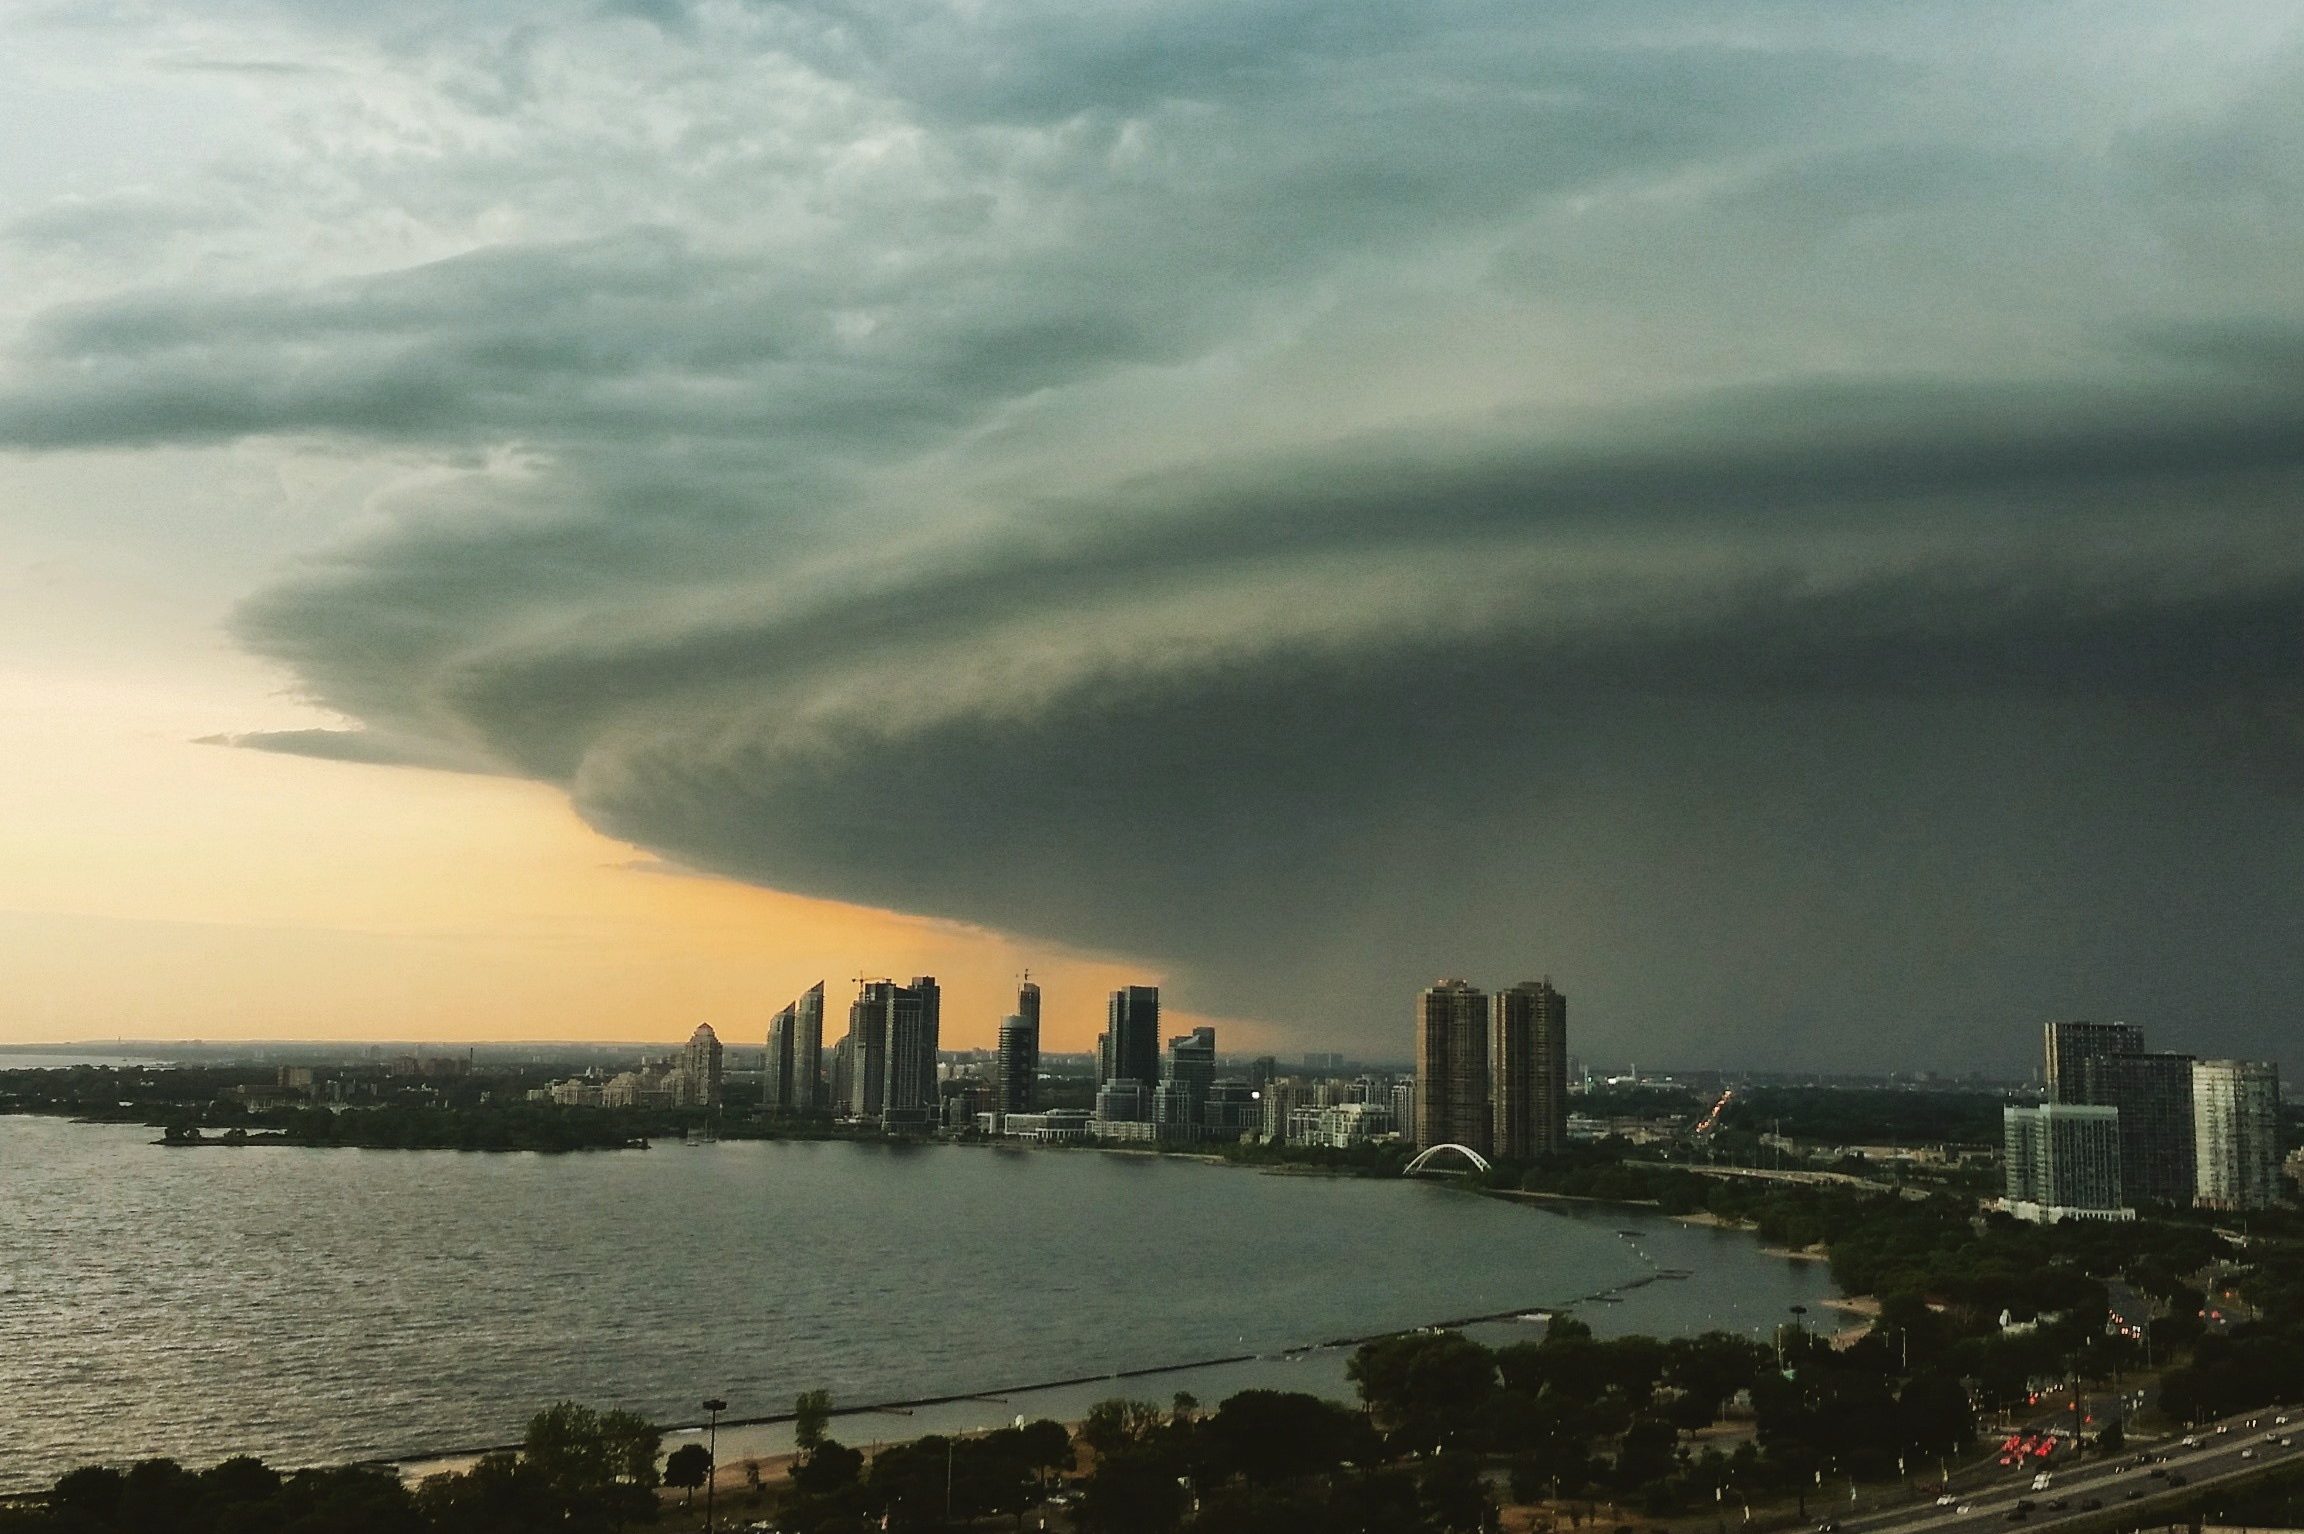 A major storm cloud moves over Etobicoke on Sunday, Aug. 2. Environment Canada is forecasting thunderstorms and heavy rain for today. The photographer said the image has a yellow filter from an in-camera editing program. 